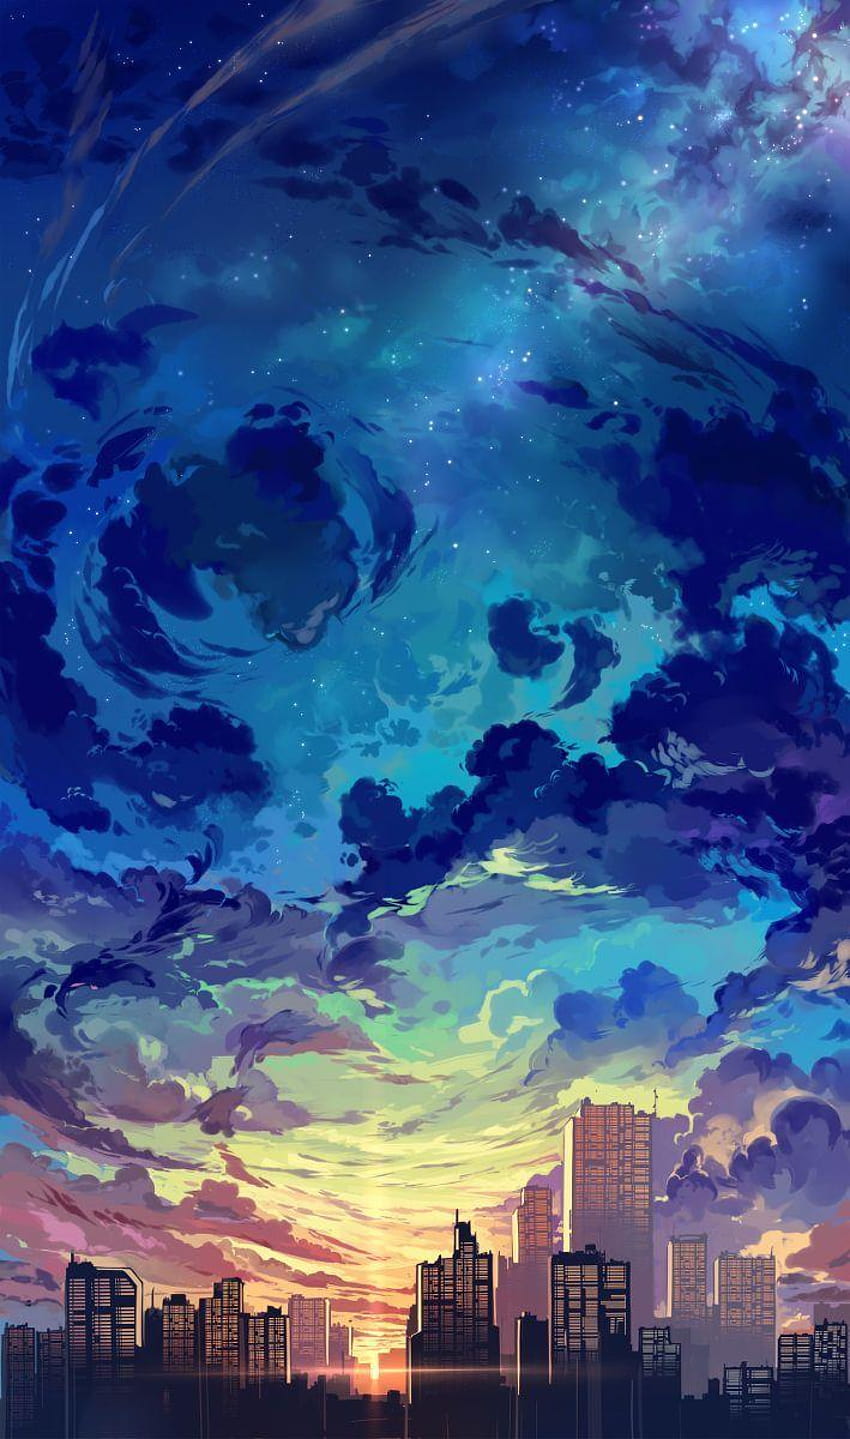 We did a selective selection of iPhone illustrations, breathtaking scenery HD phone wallpaper